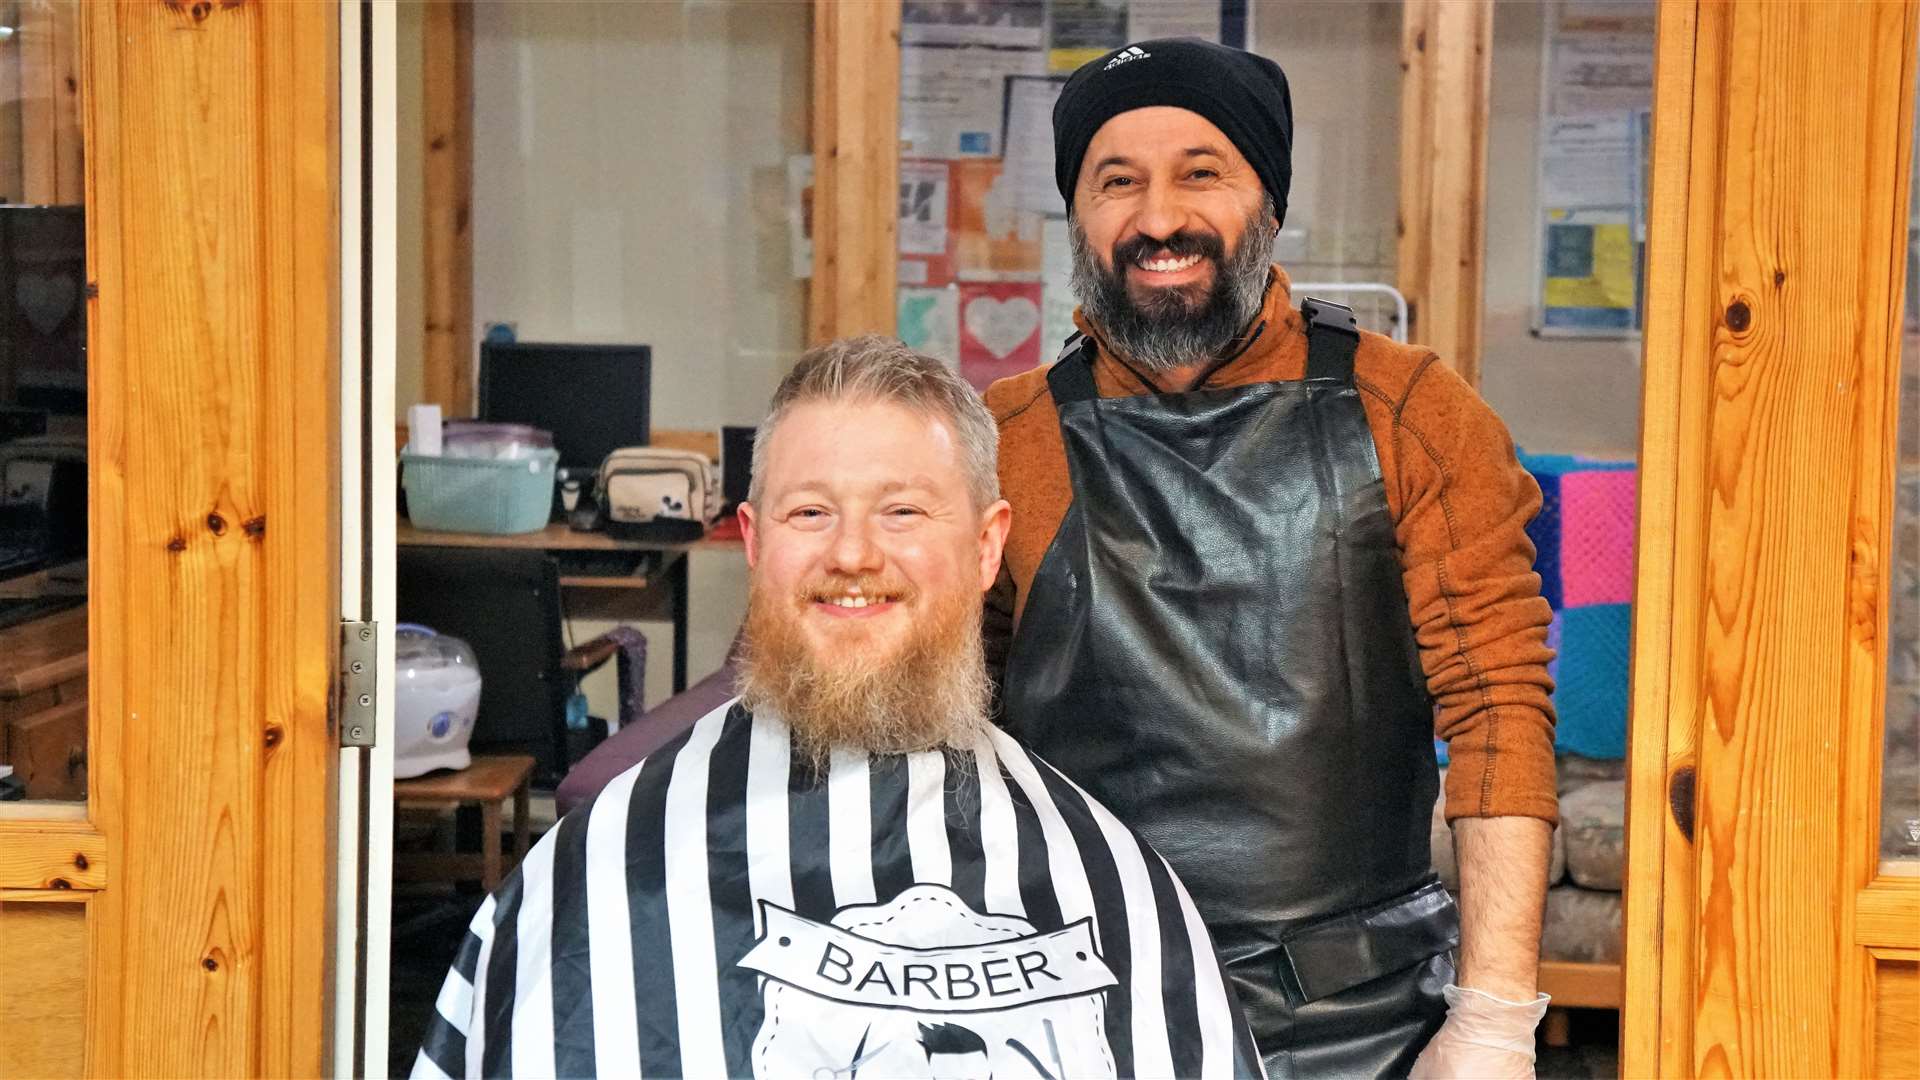 Ryan just before the shave. Behind him stands local Turkish barber Ismail Dogrulmaz who is getting prepared. Picture: DGS